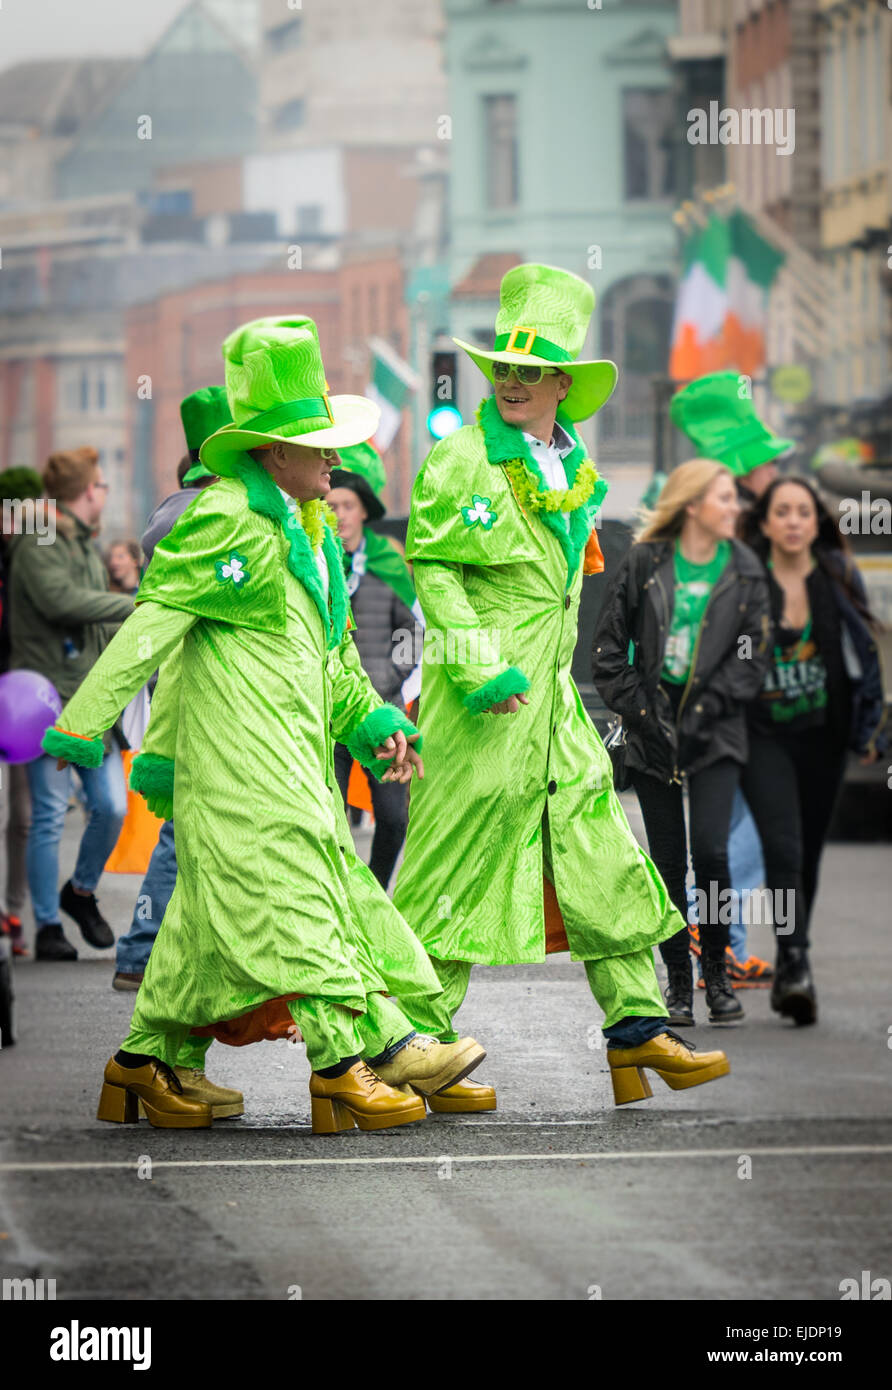 Revellers dressed in green glam outfits celebrating St Patrick's Day 2015 in Dublin Stock Photo